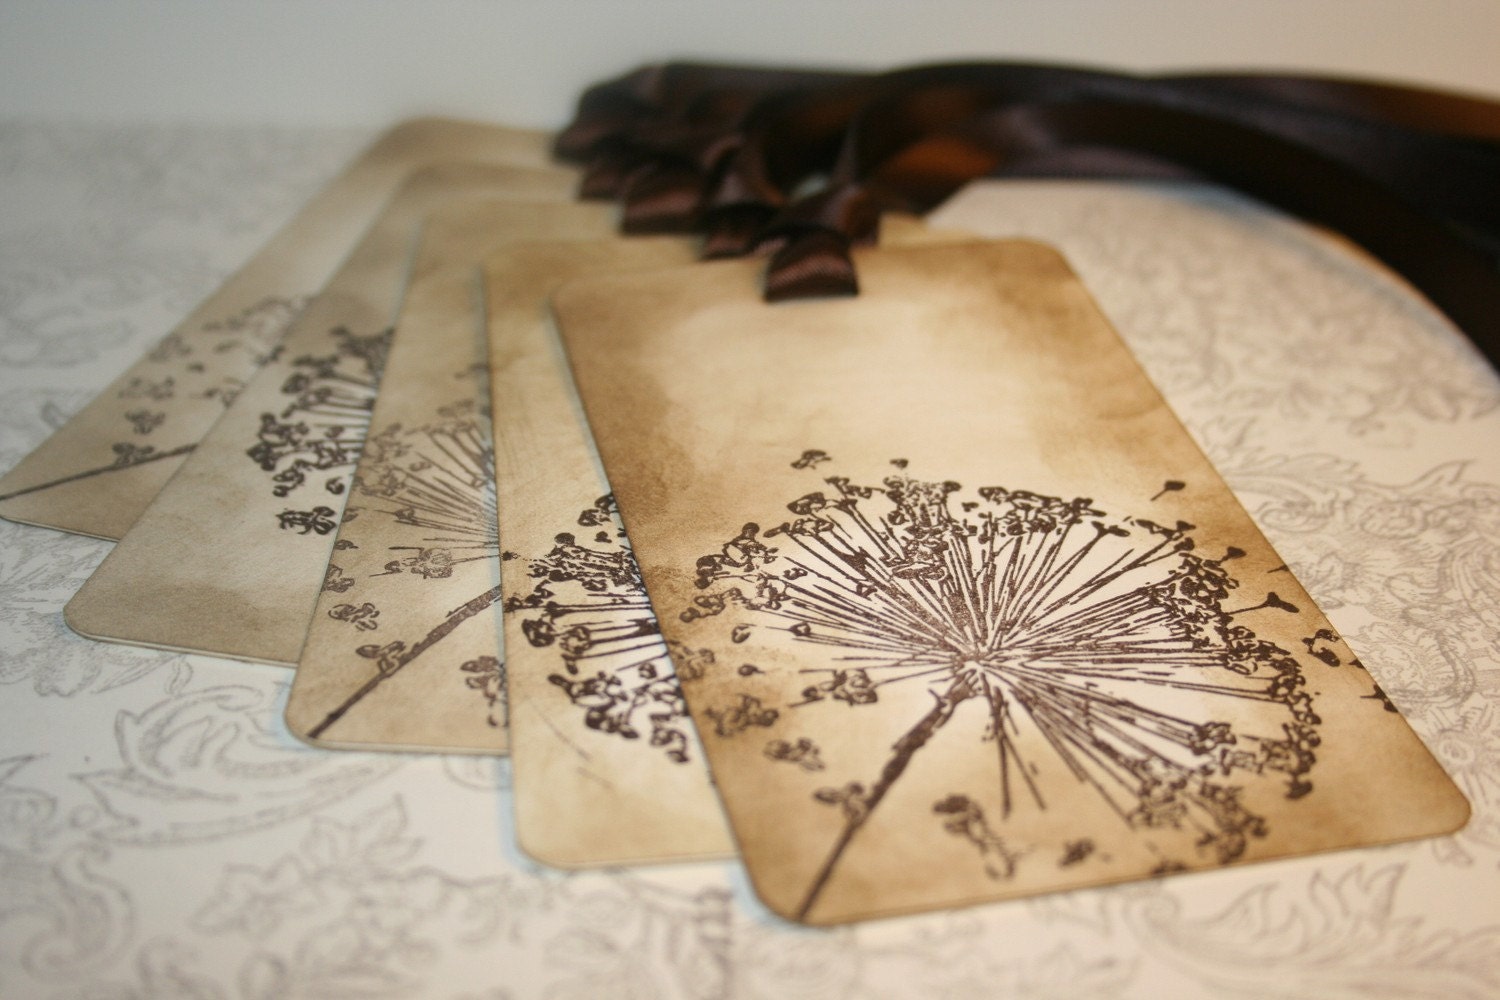 Wedding Wish Tree Tags - Dandelion wishes - Vintage Appearance Tags - Set of 5